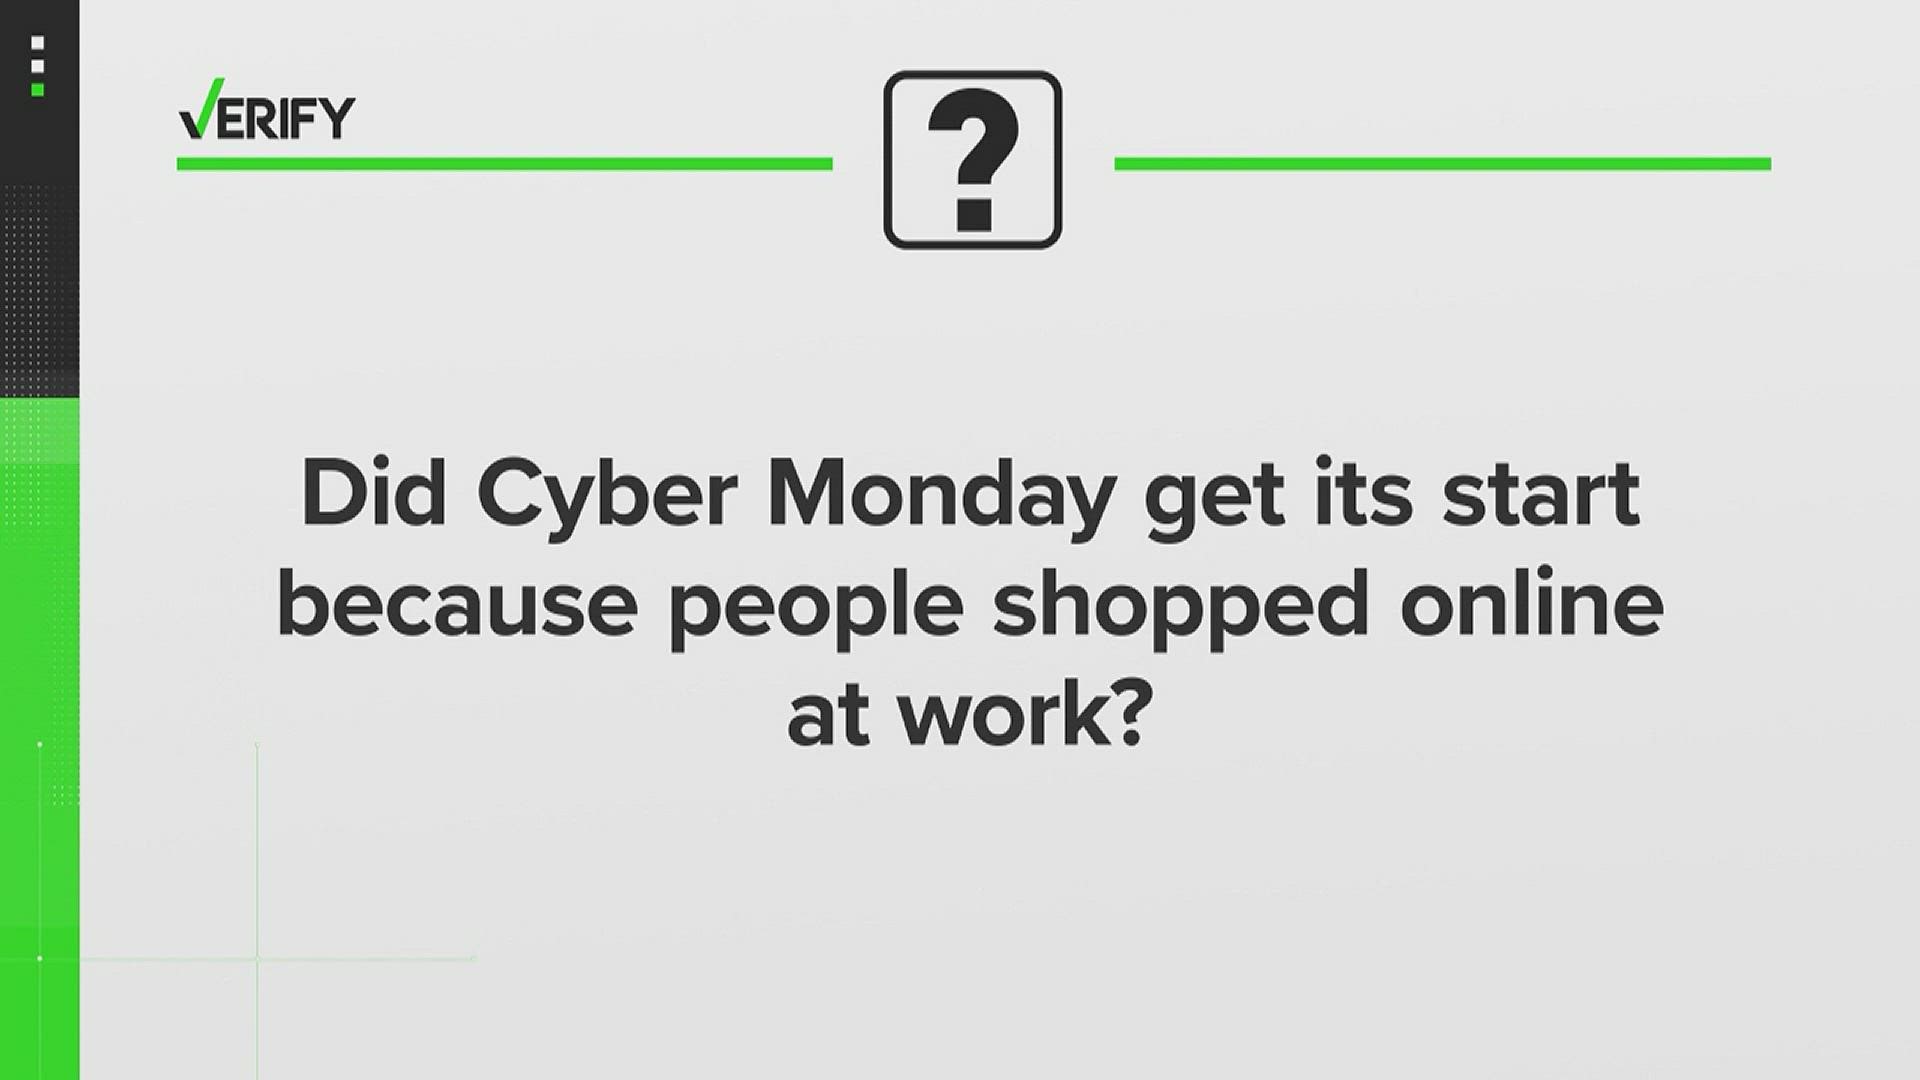 Some websites Cyber Monday was inspired by office workers not exactly working.